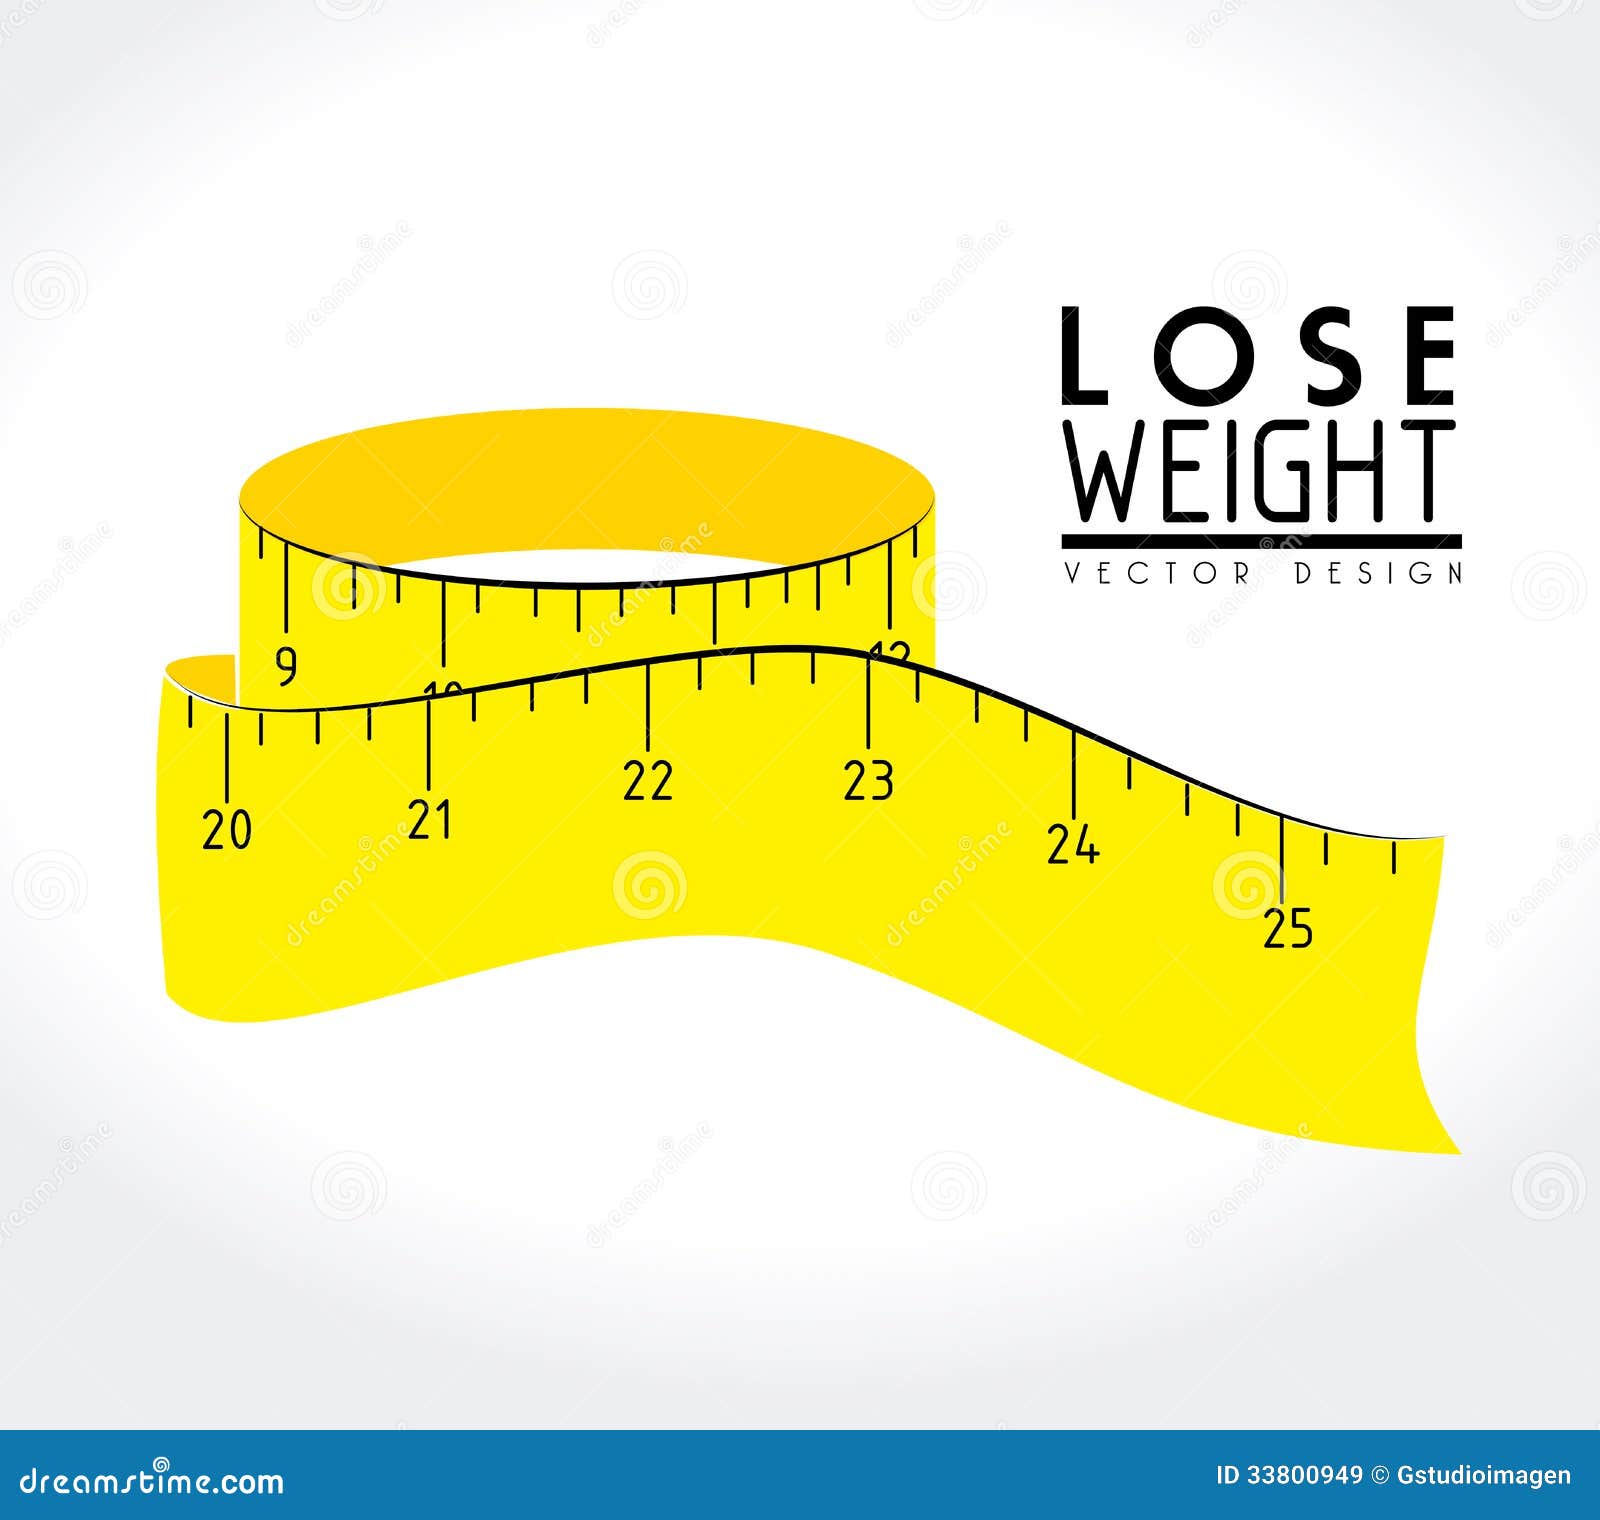 free clipart images weight loss - photo #21